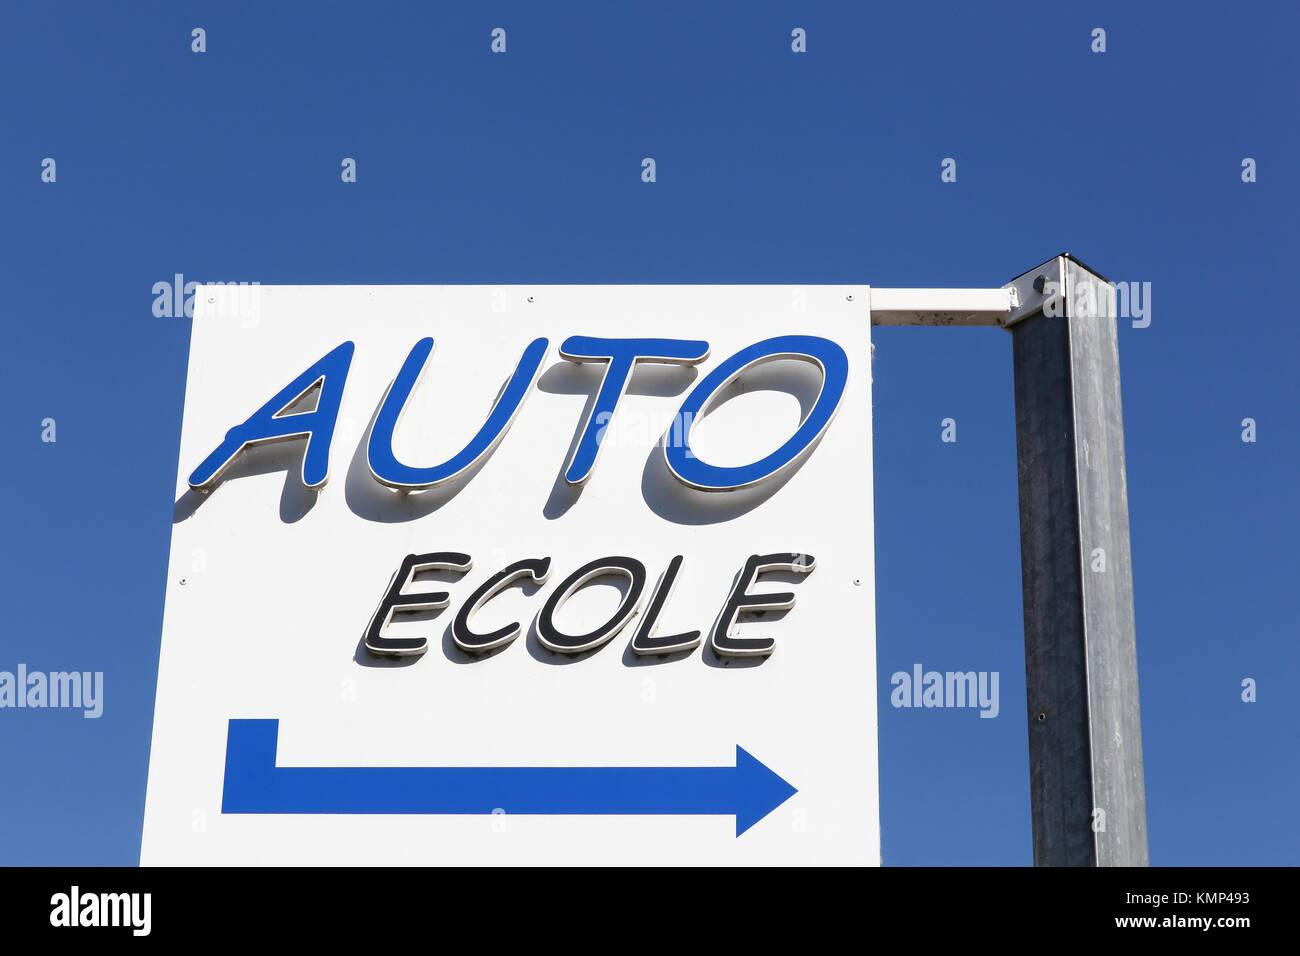 Driving school sign in French Stock Photo